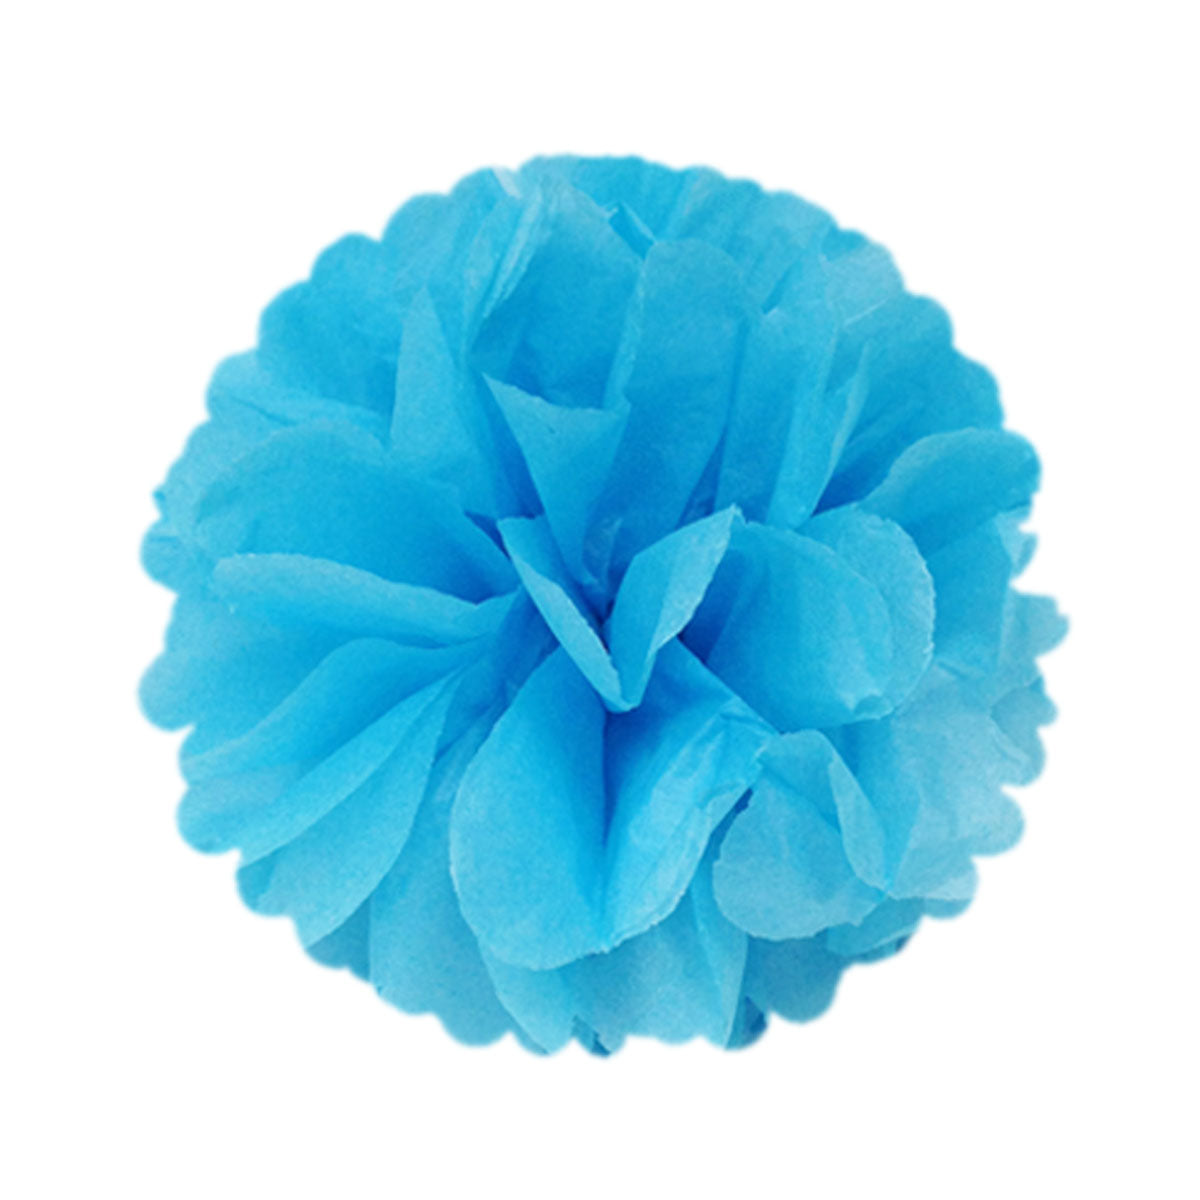 Wrapables 8 inch Set of 5 Tissue Pom Poms Party Decorations for Weddings, Birthday Parties Baby Showers and Nursery Dcor, Blue